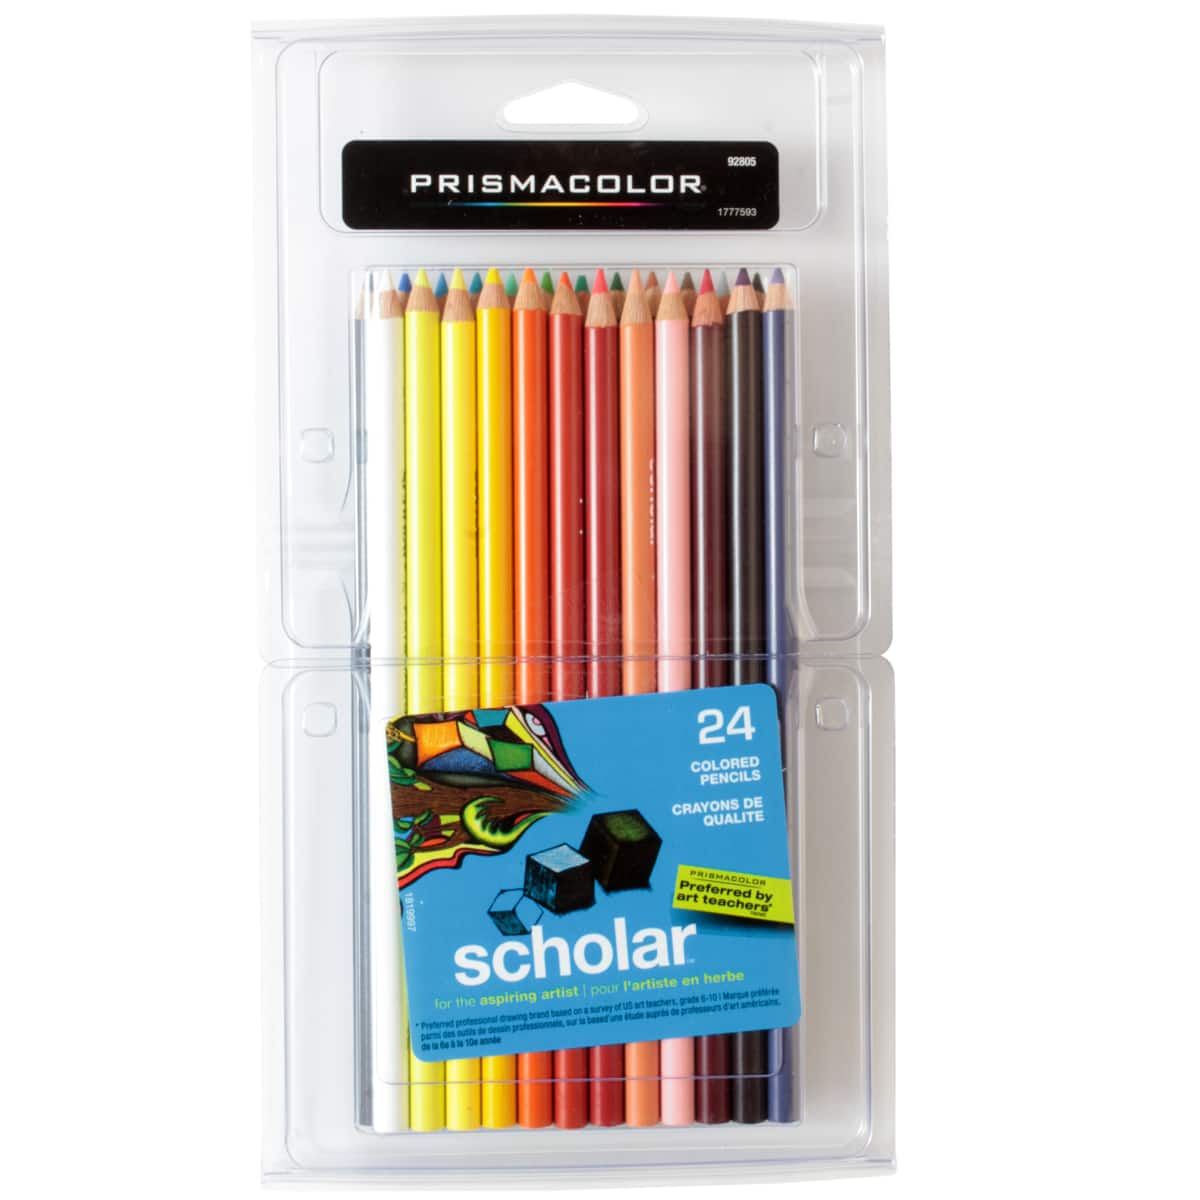 What's your go to Pencil Set? We all know I love my prismacolors